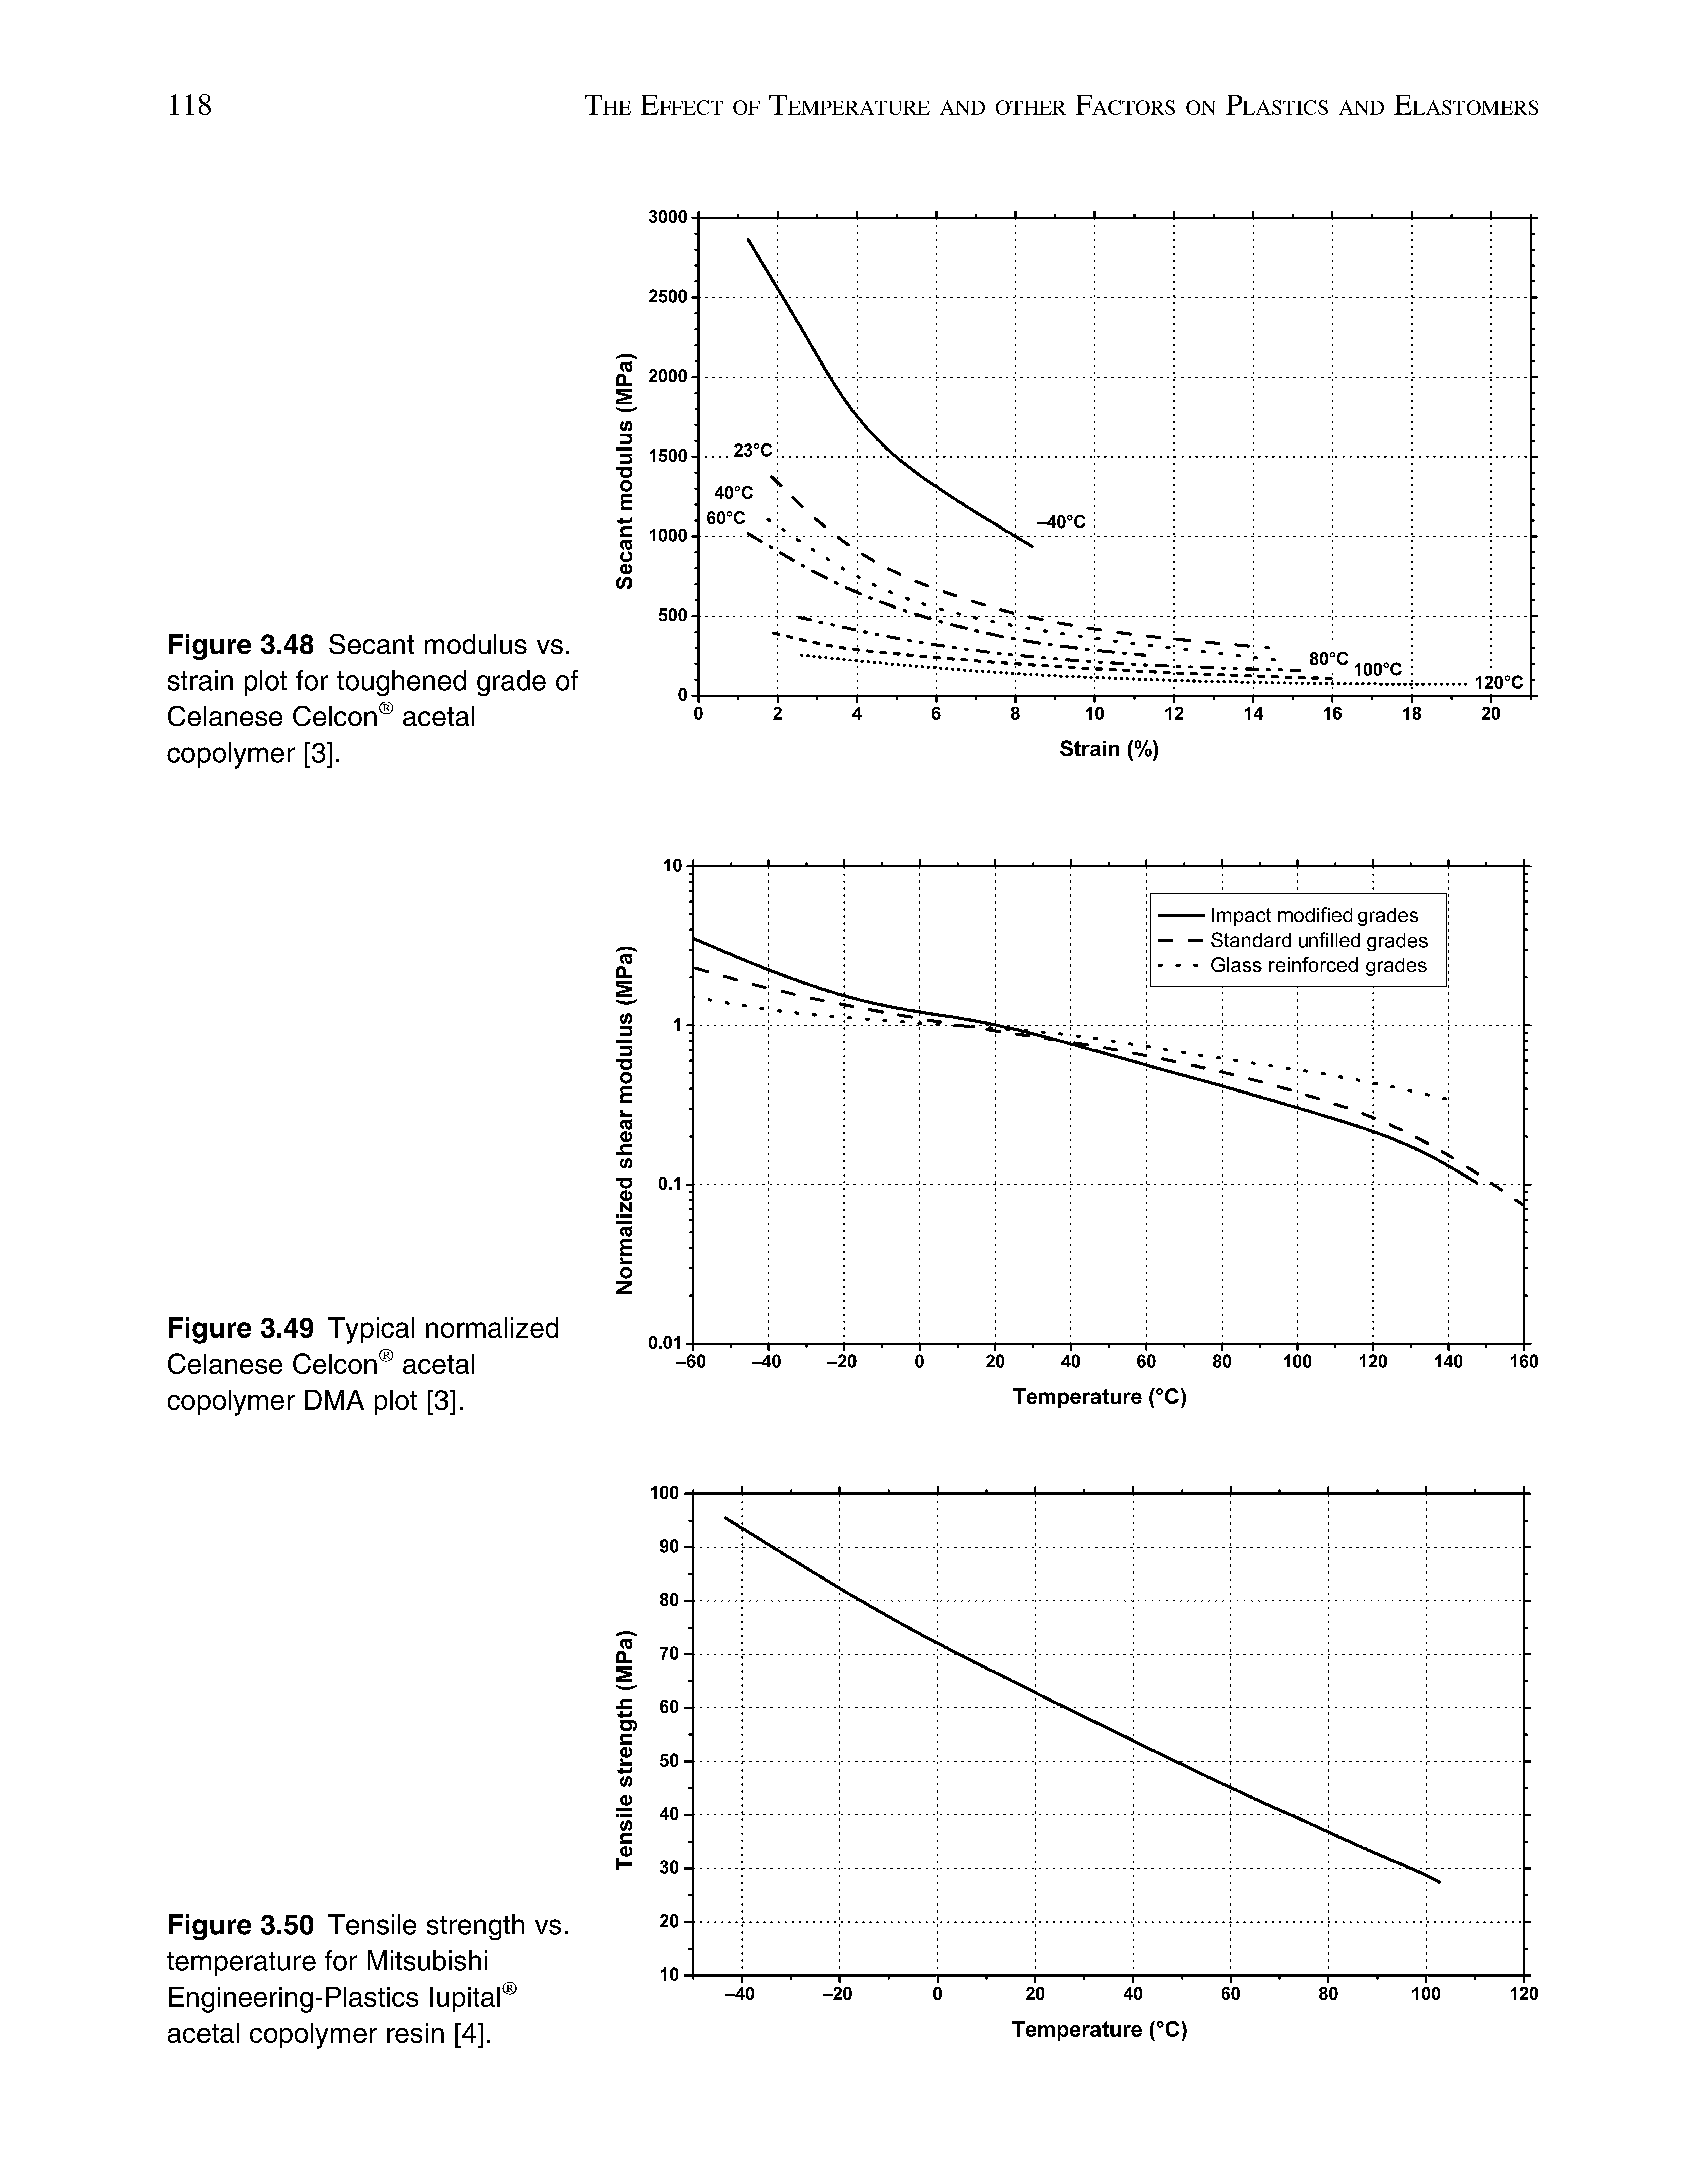 Figure 3.49 Typical normalized Celanese Celcon acetal copolymer DMA plot [3].